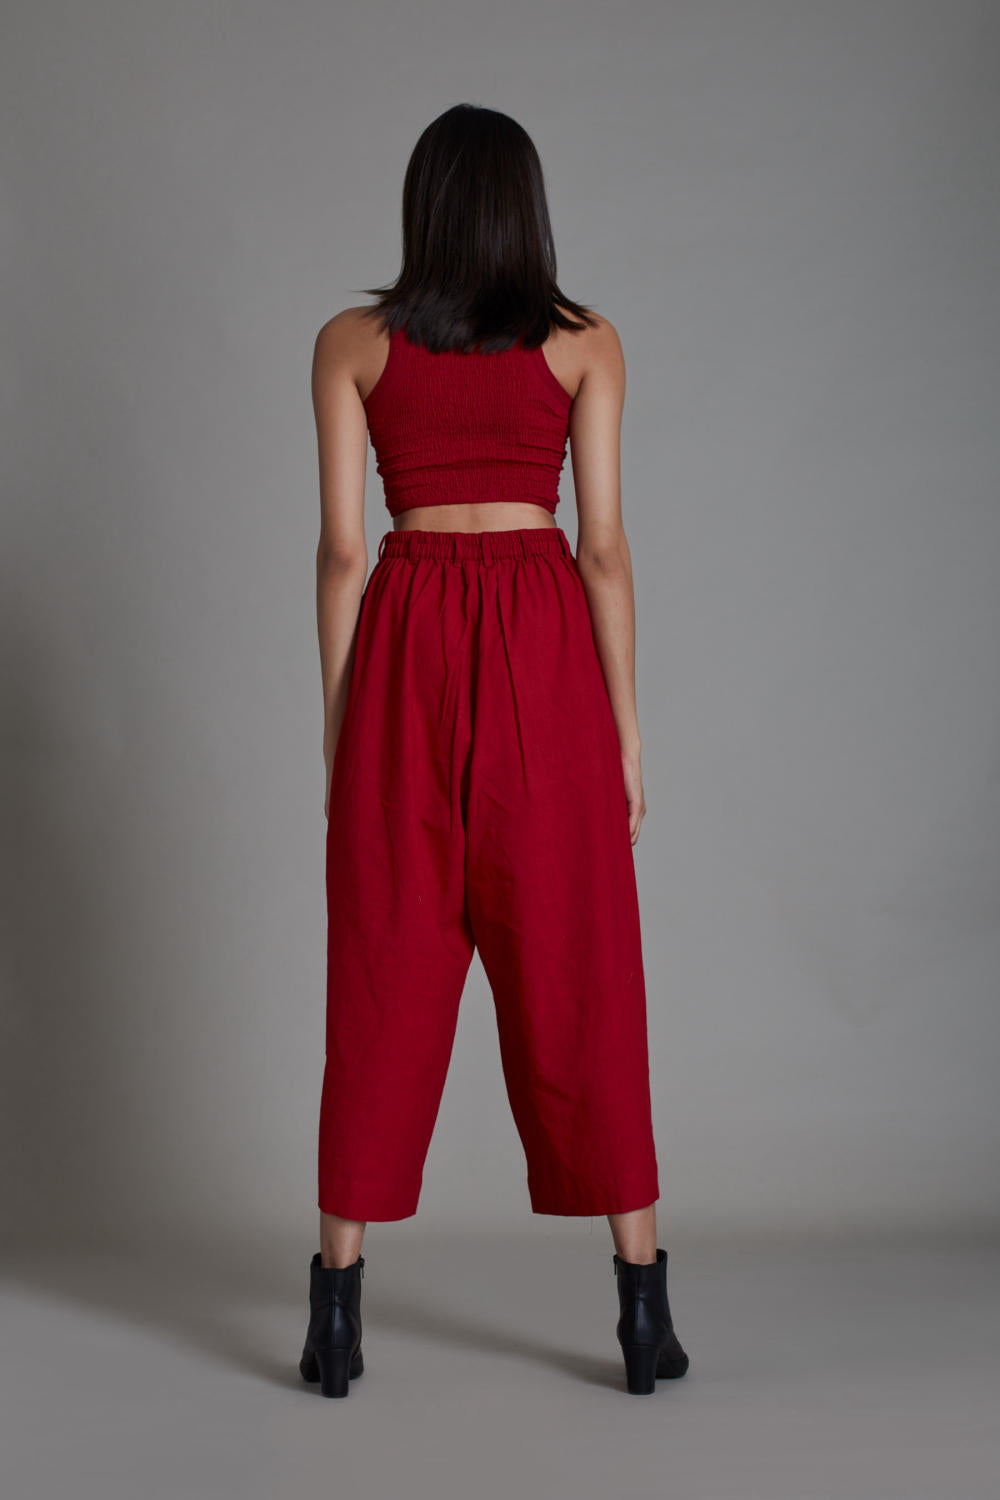 SMOCKED TOP & SOLITAIRE PANTS - RED